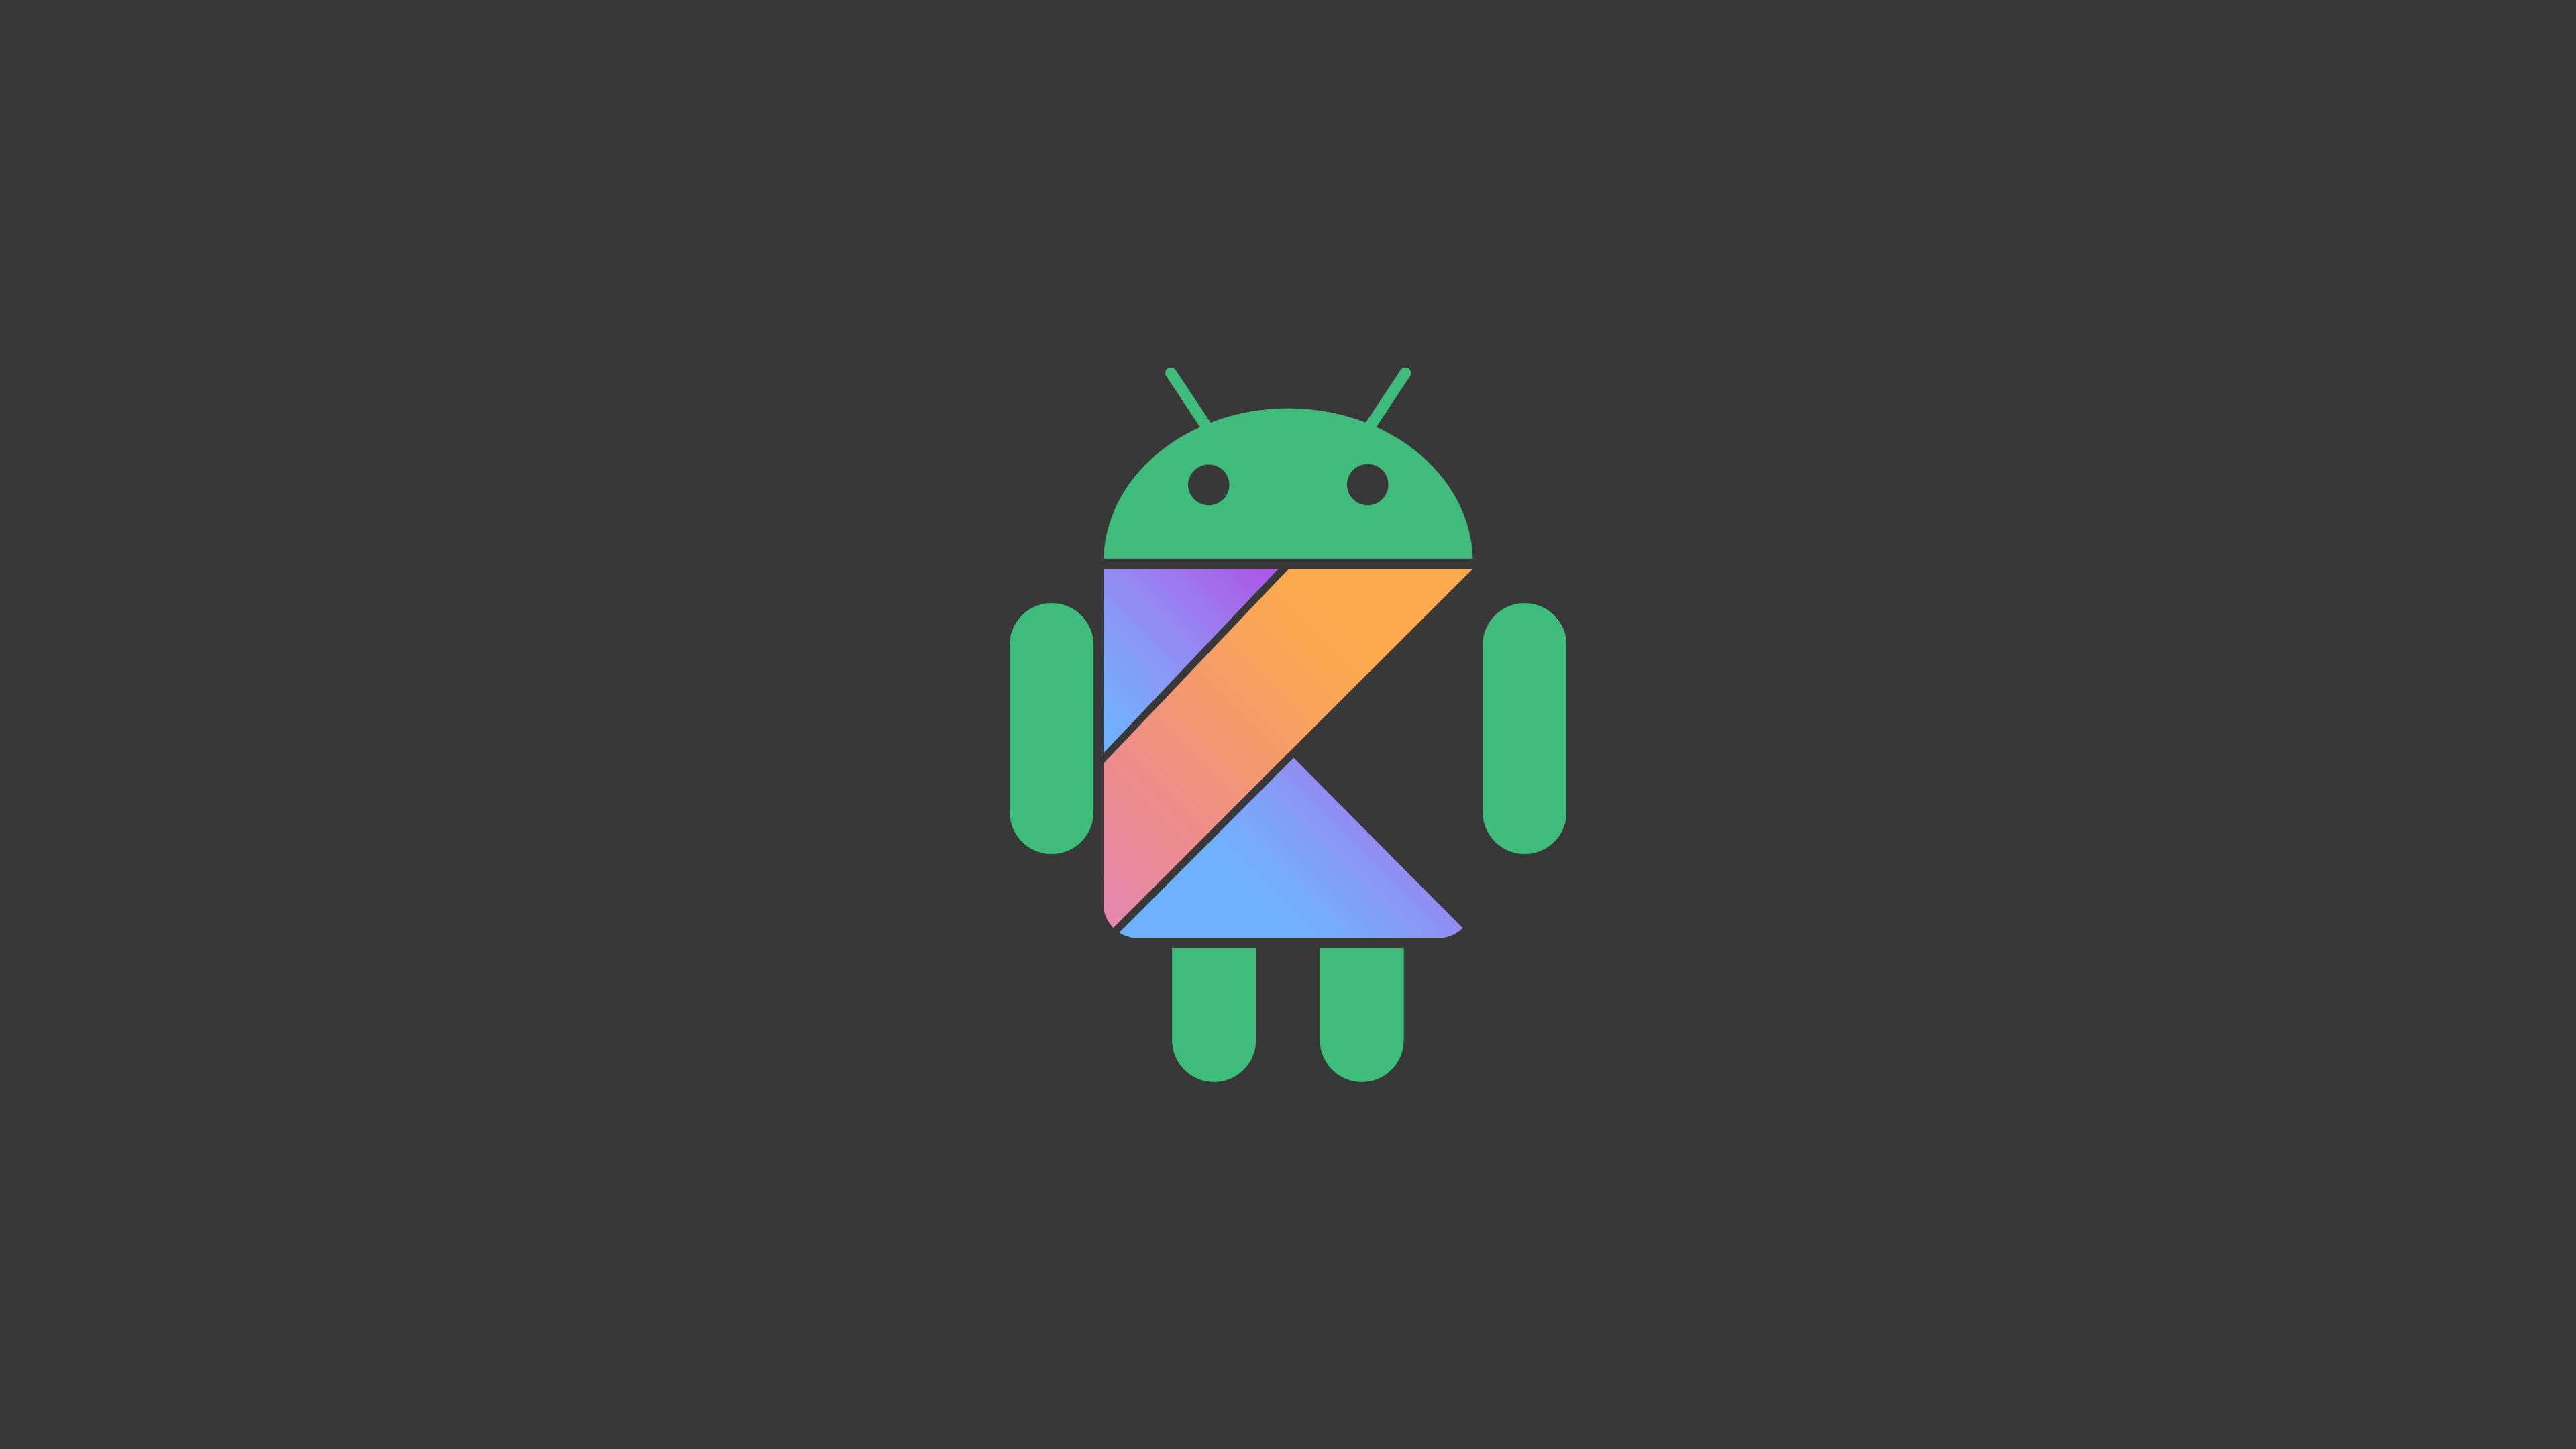 Android Operating System Minimalism Material Minimal Material Style Simple Simple Background Digital 3840x2160